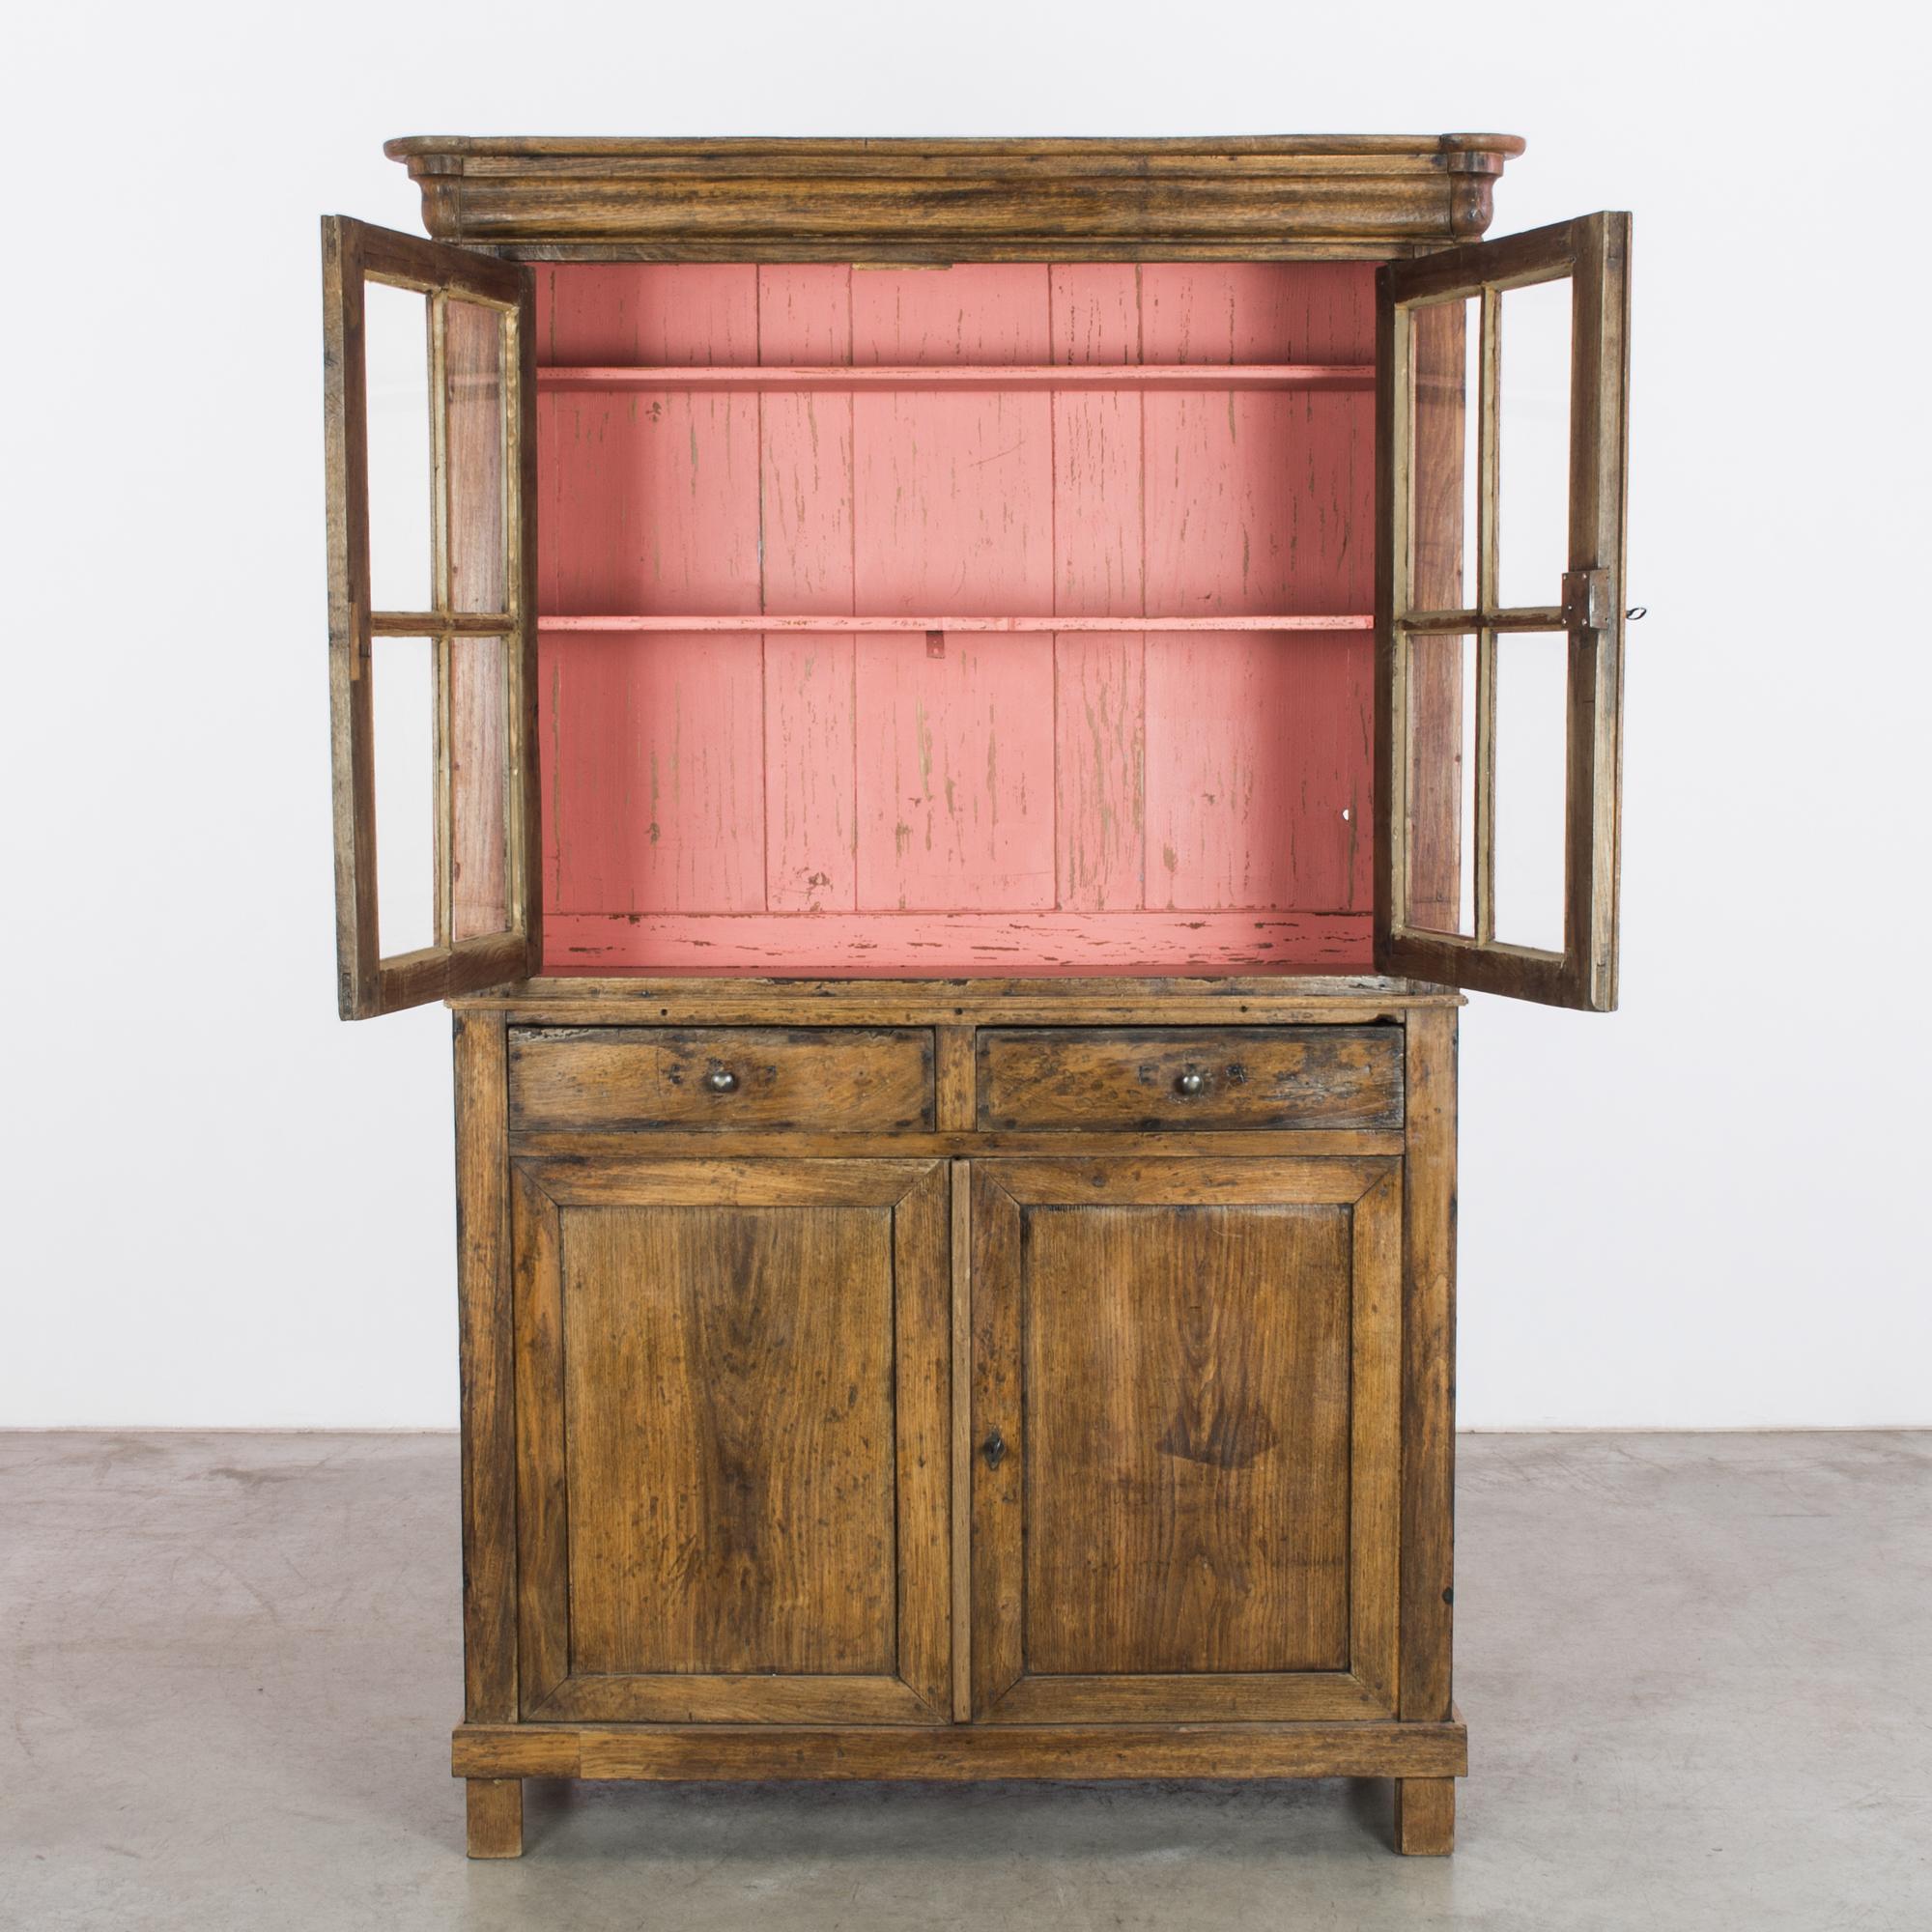 19th Century 1880s French Country Oak Vitrine with Rose Pink Interior